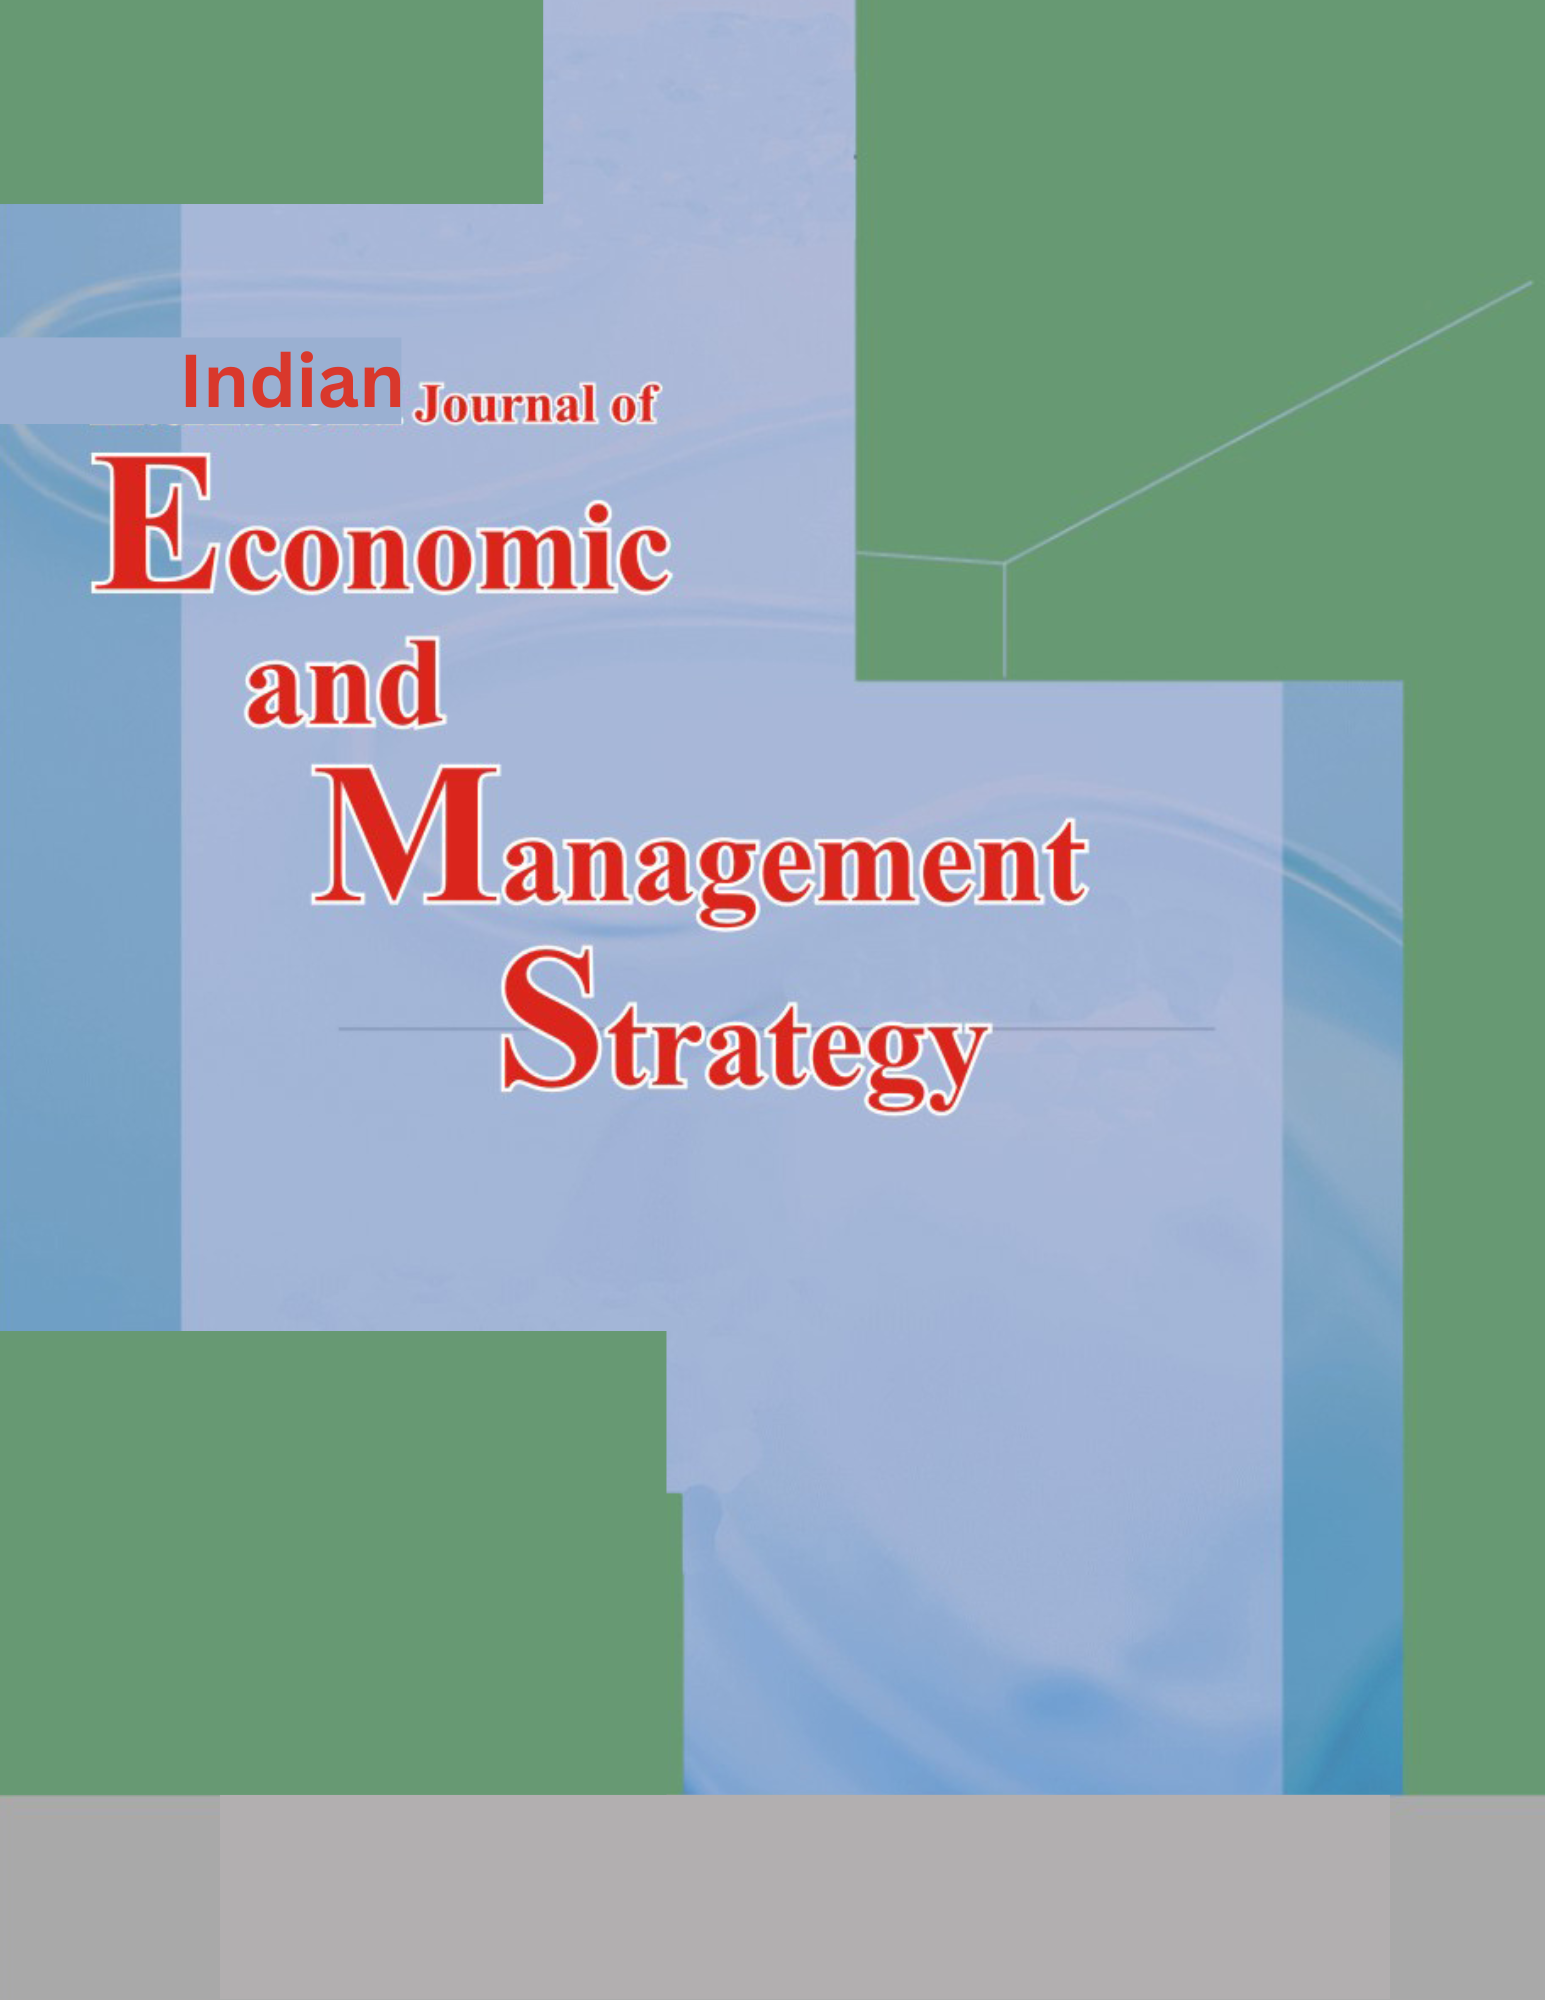 Indian Journal of Economic and Management Strategy